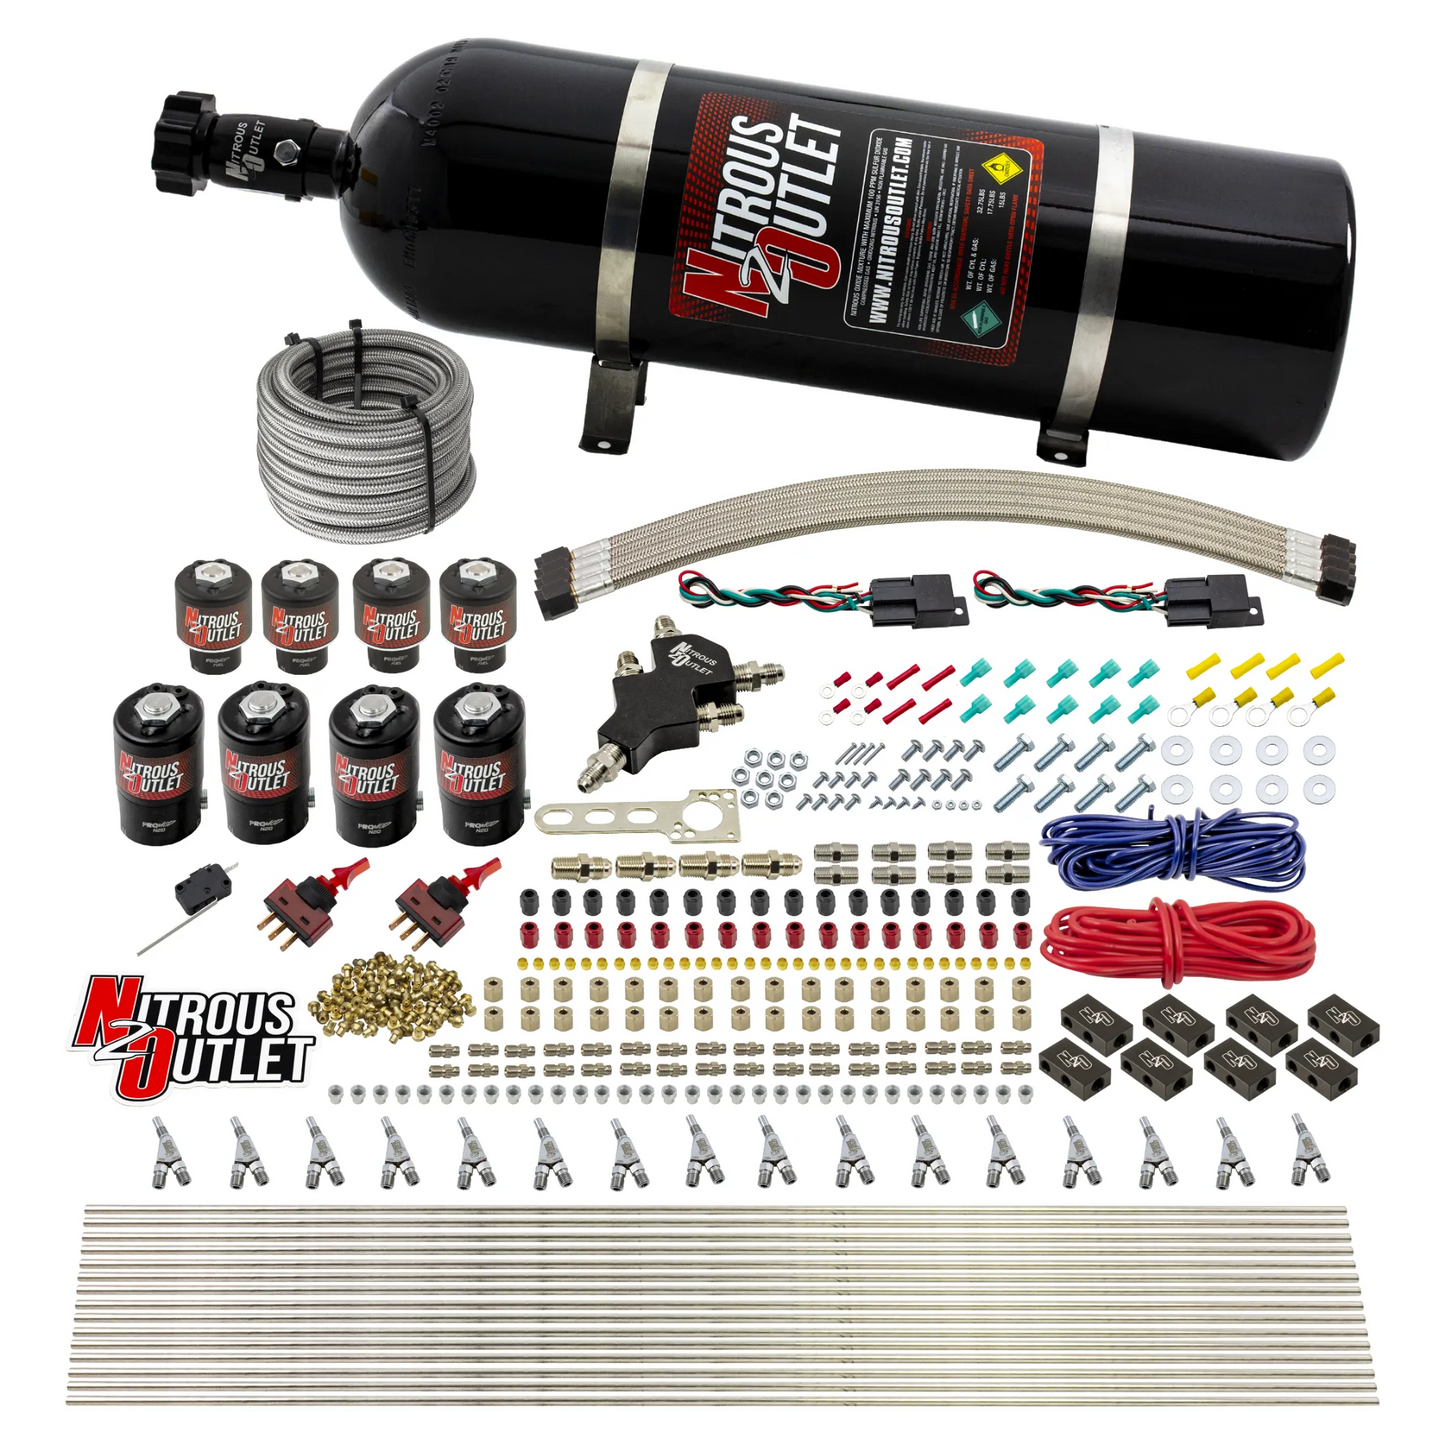 8 Cylinder Dual Stage Direct Port Nitrous System - .122 Nitrous/.177 Fuel Solenoids - Alcohol - Straight Blow Through Nozzles